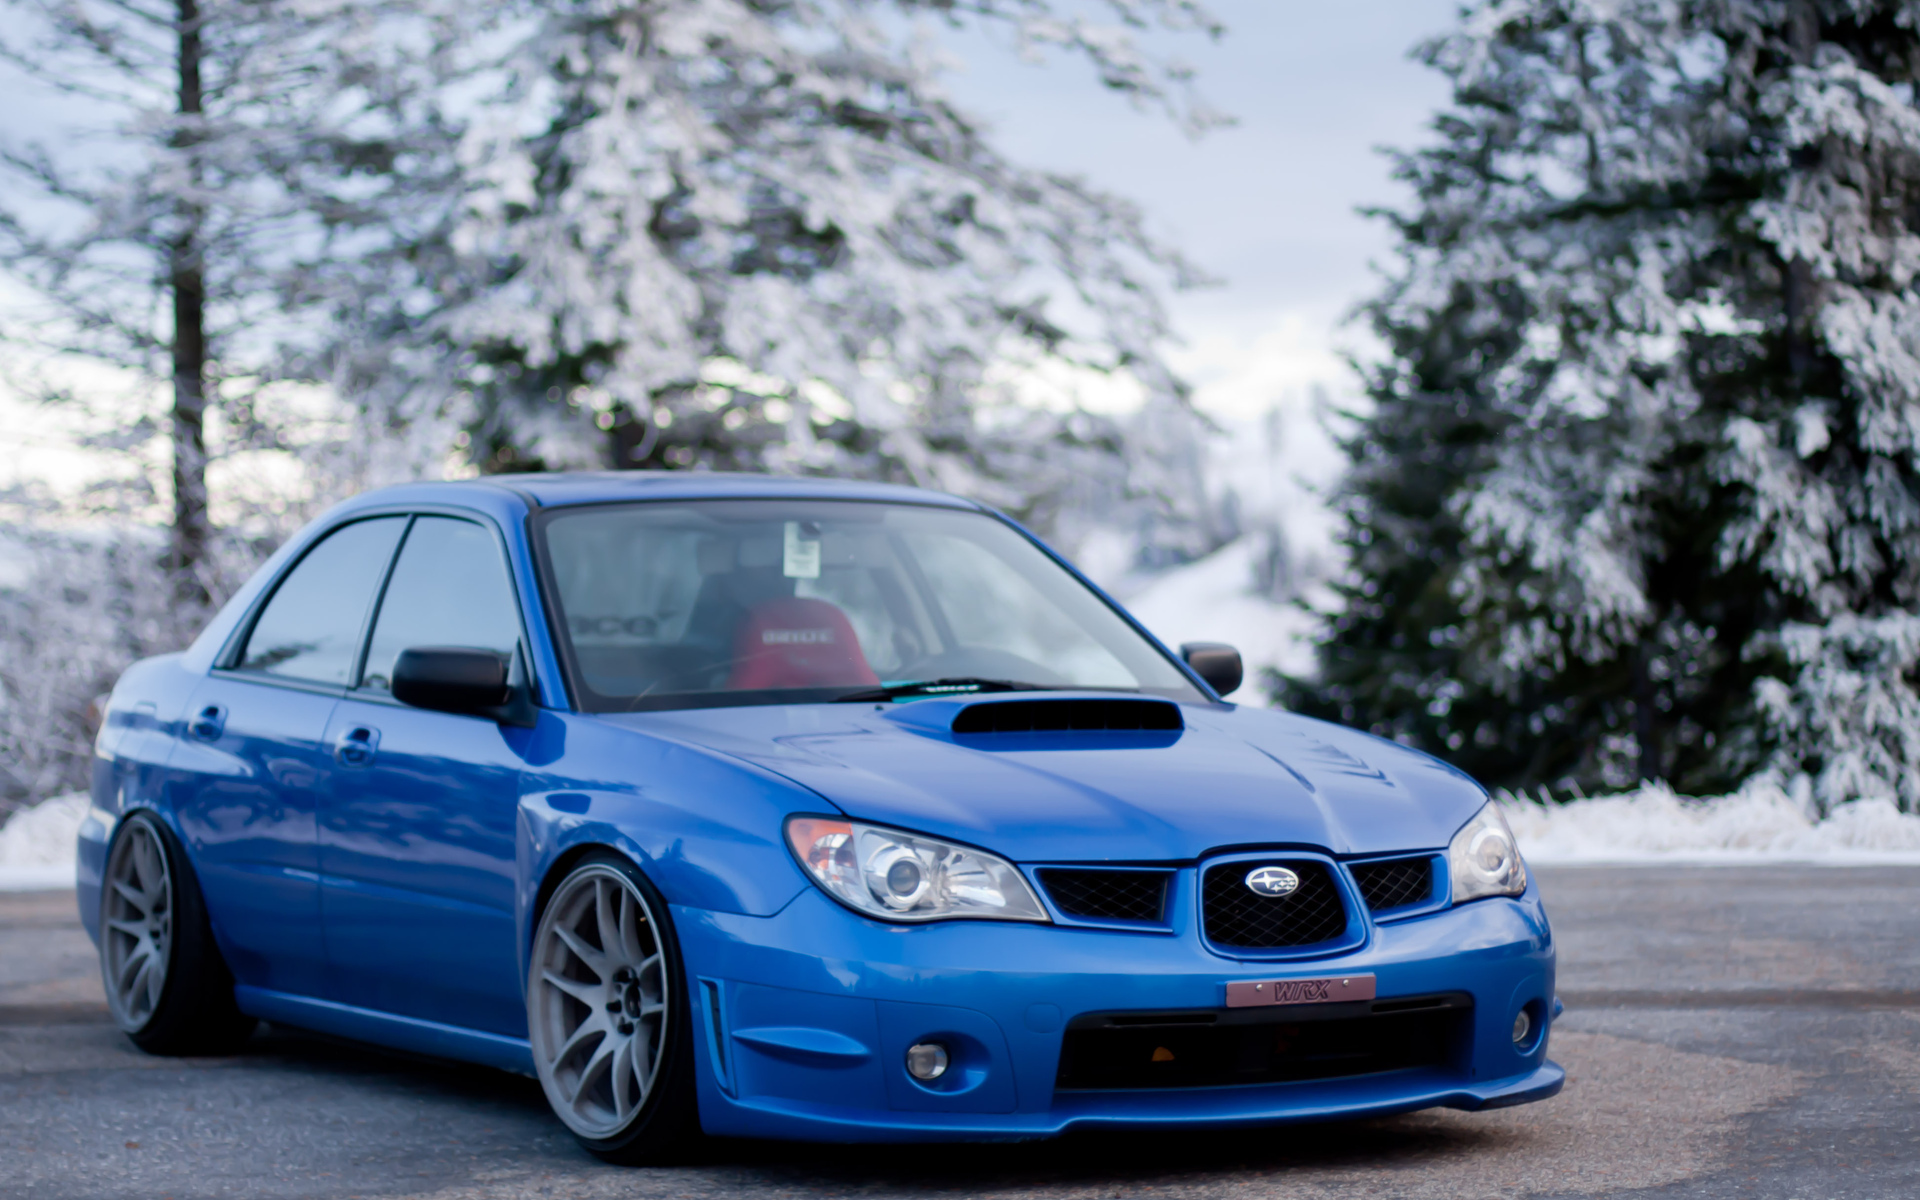 Free photo The blue subaru on the stance